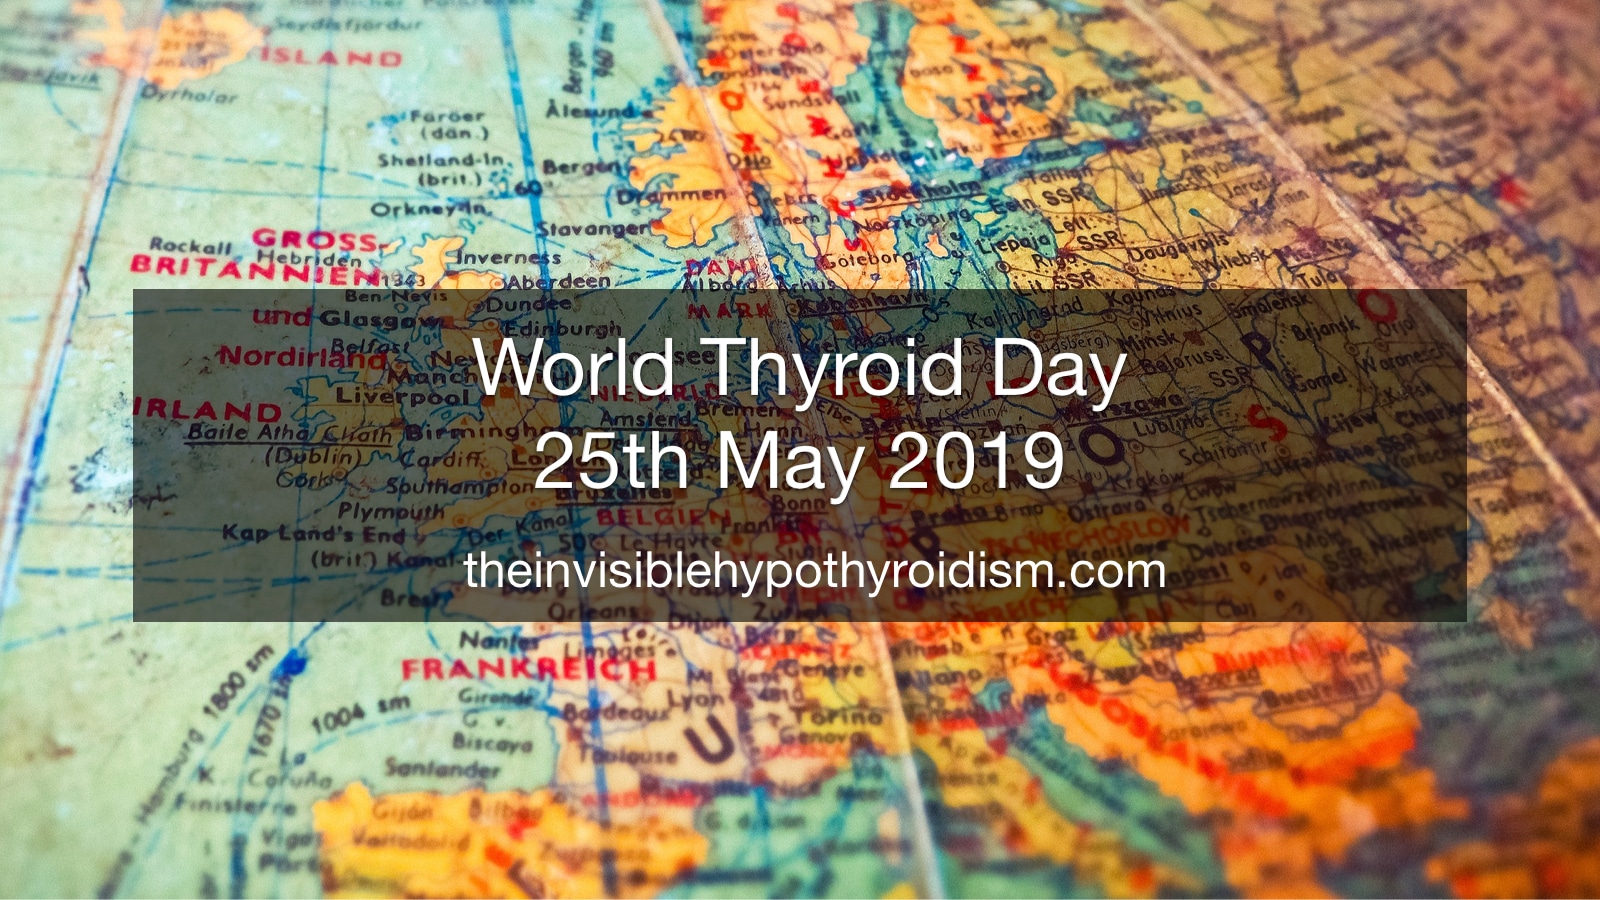 World Thyroid Day – 25th May 2019